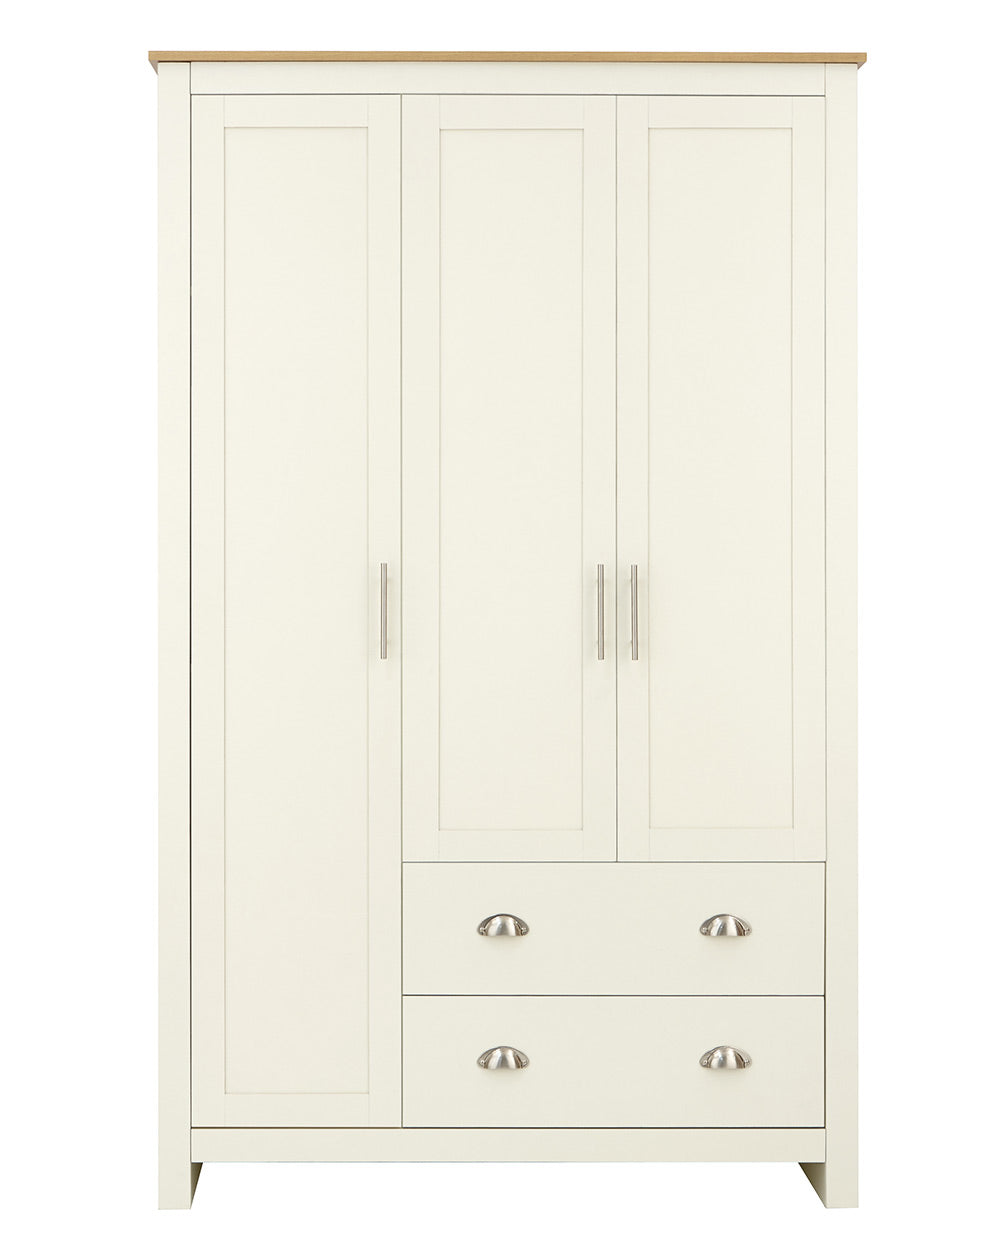 Lancaster 3 door 2 drawer wardrobe shaker style doors on a white cut out background front facing 